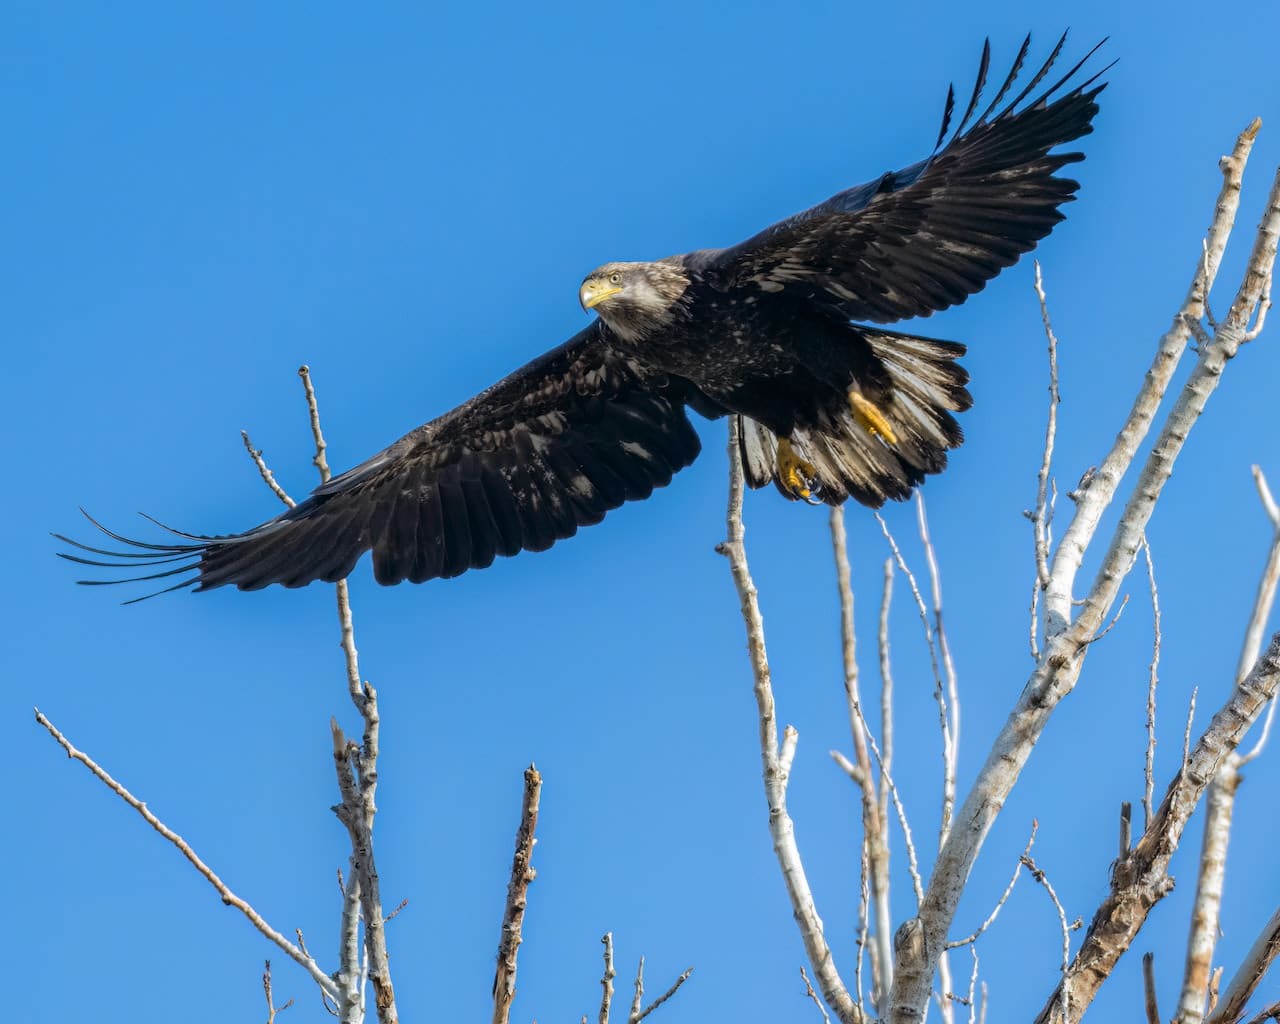 Eagle soaring with tree branches in the background